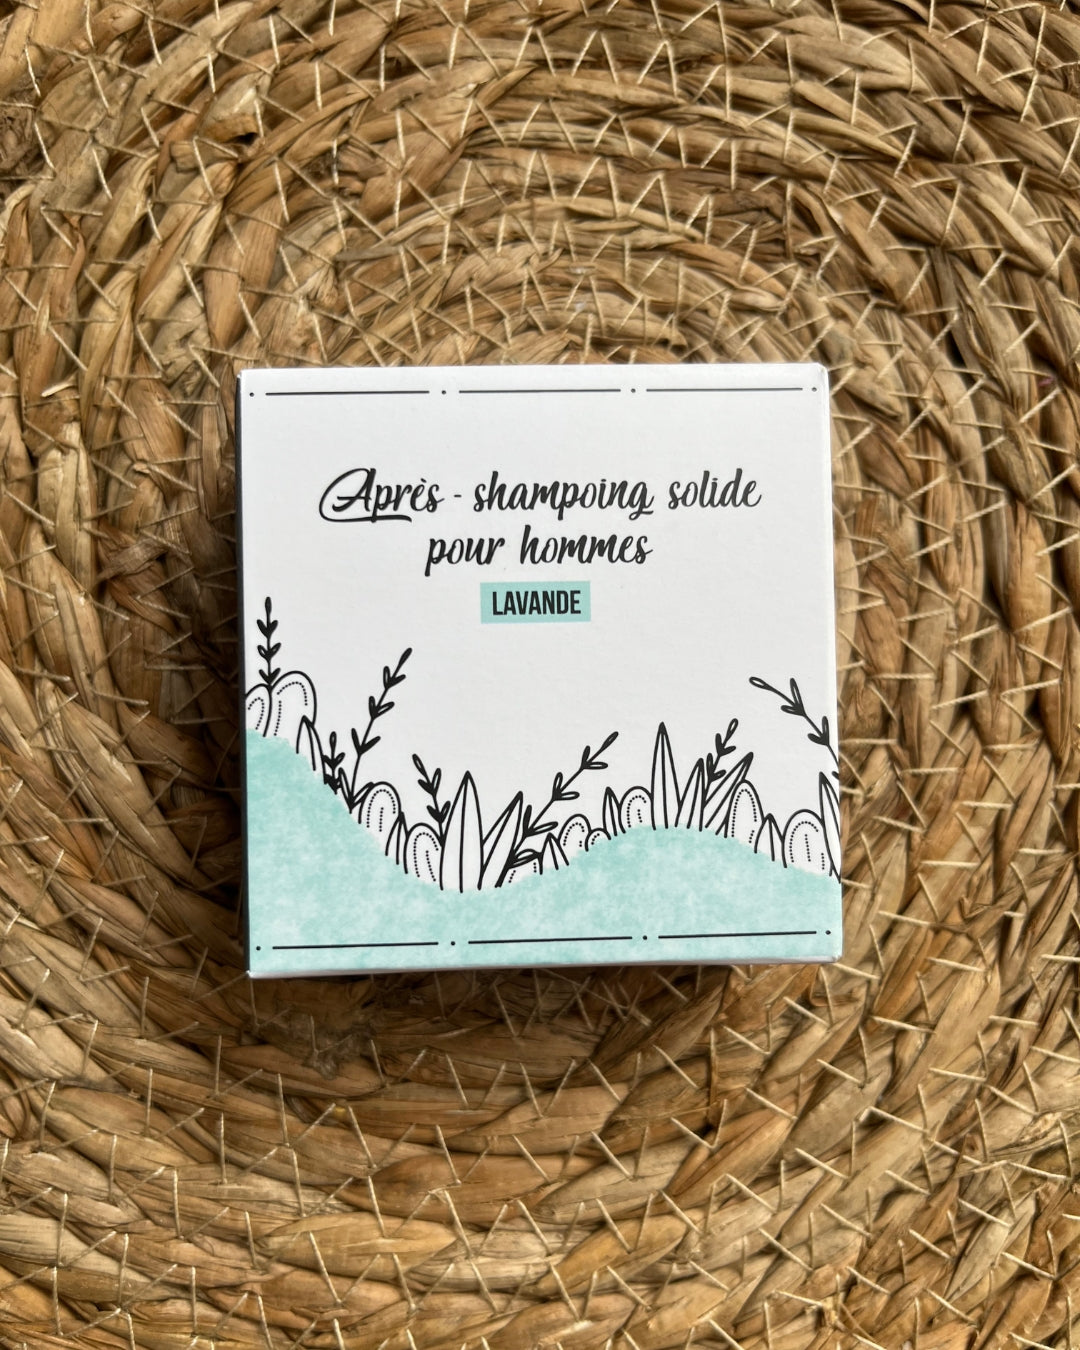 Duo Shampoing / Après-shampoing solides